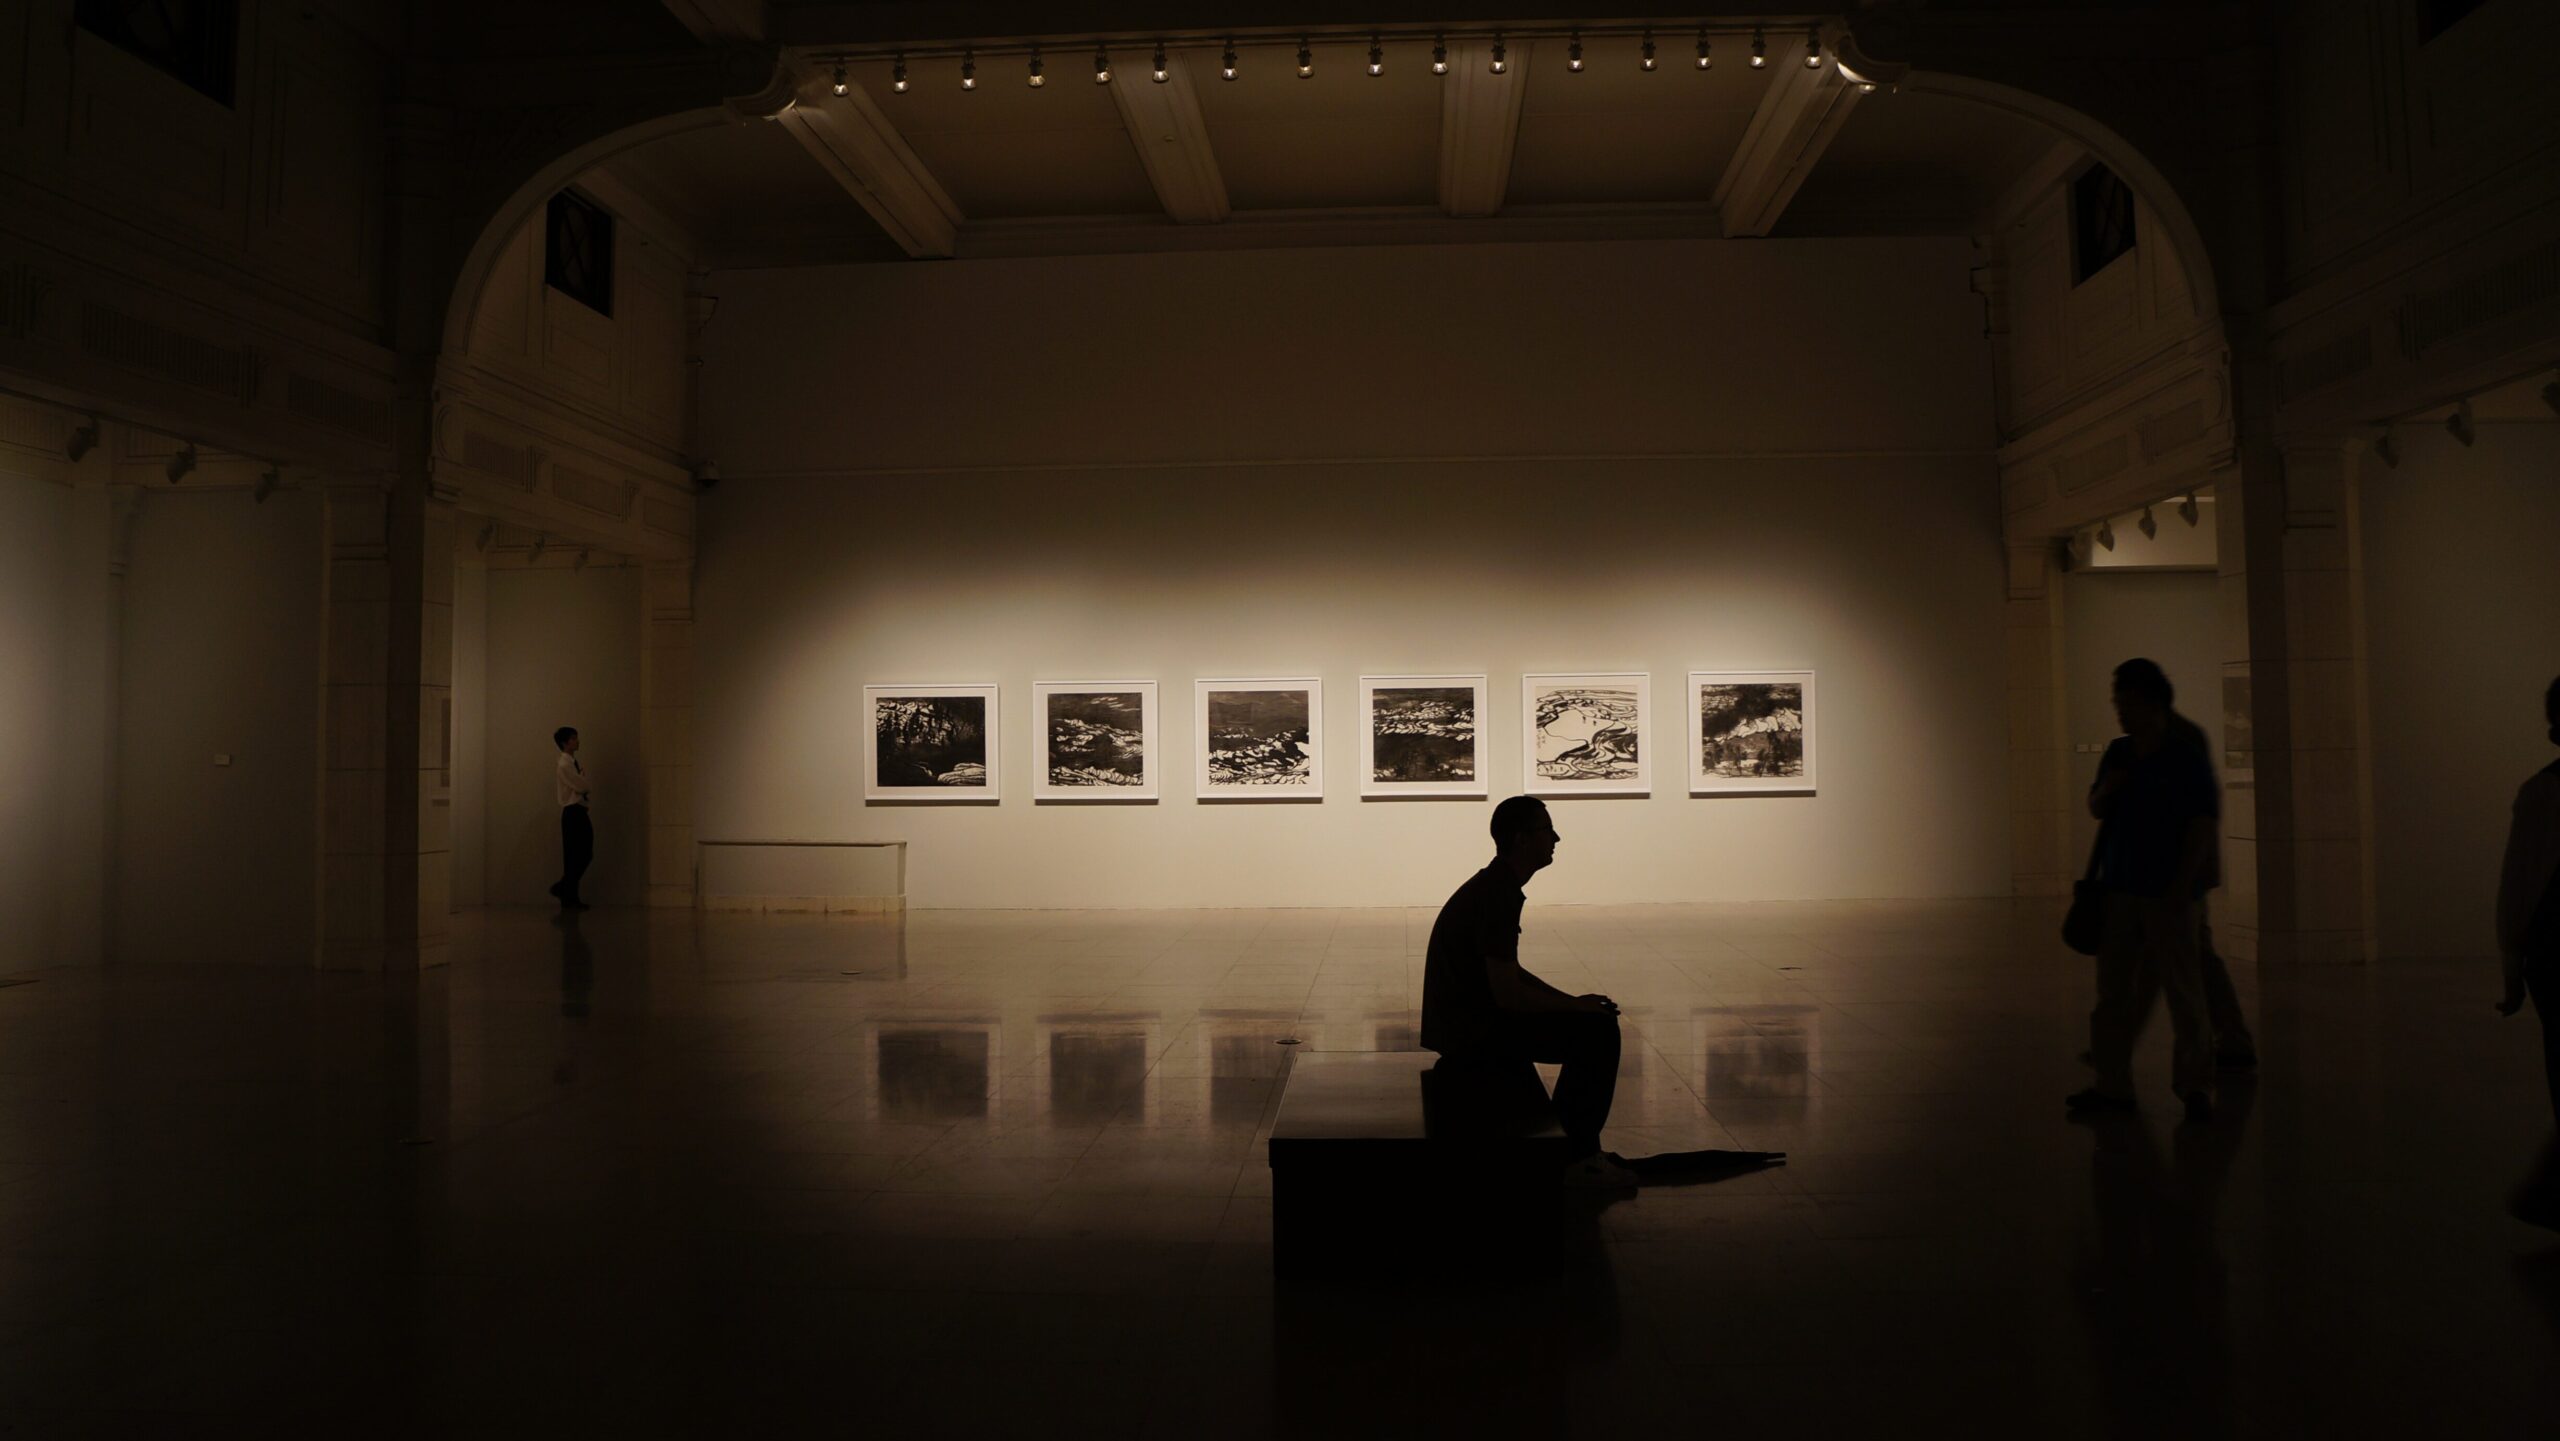 Silhouette of art investor in photography gallery. Photo by Pixabay on Pexels